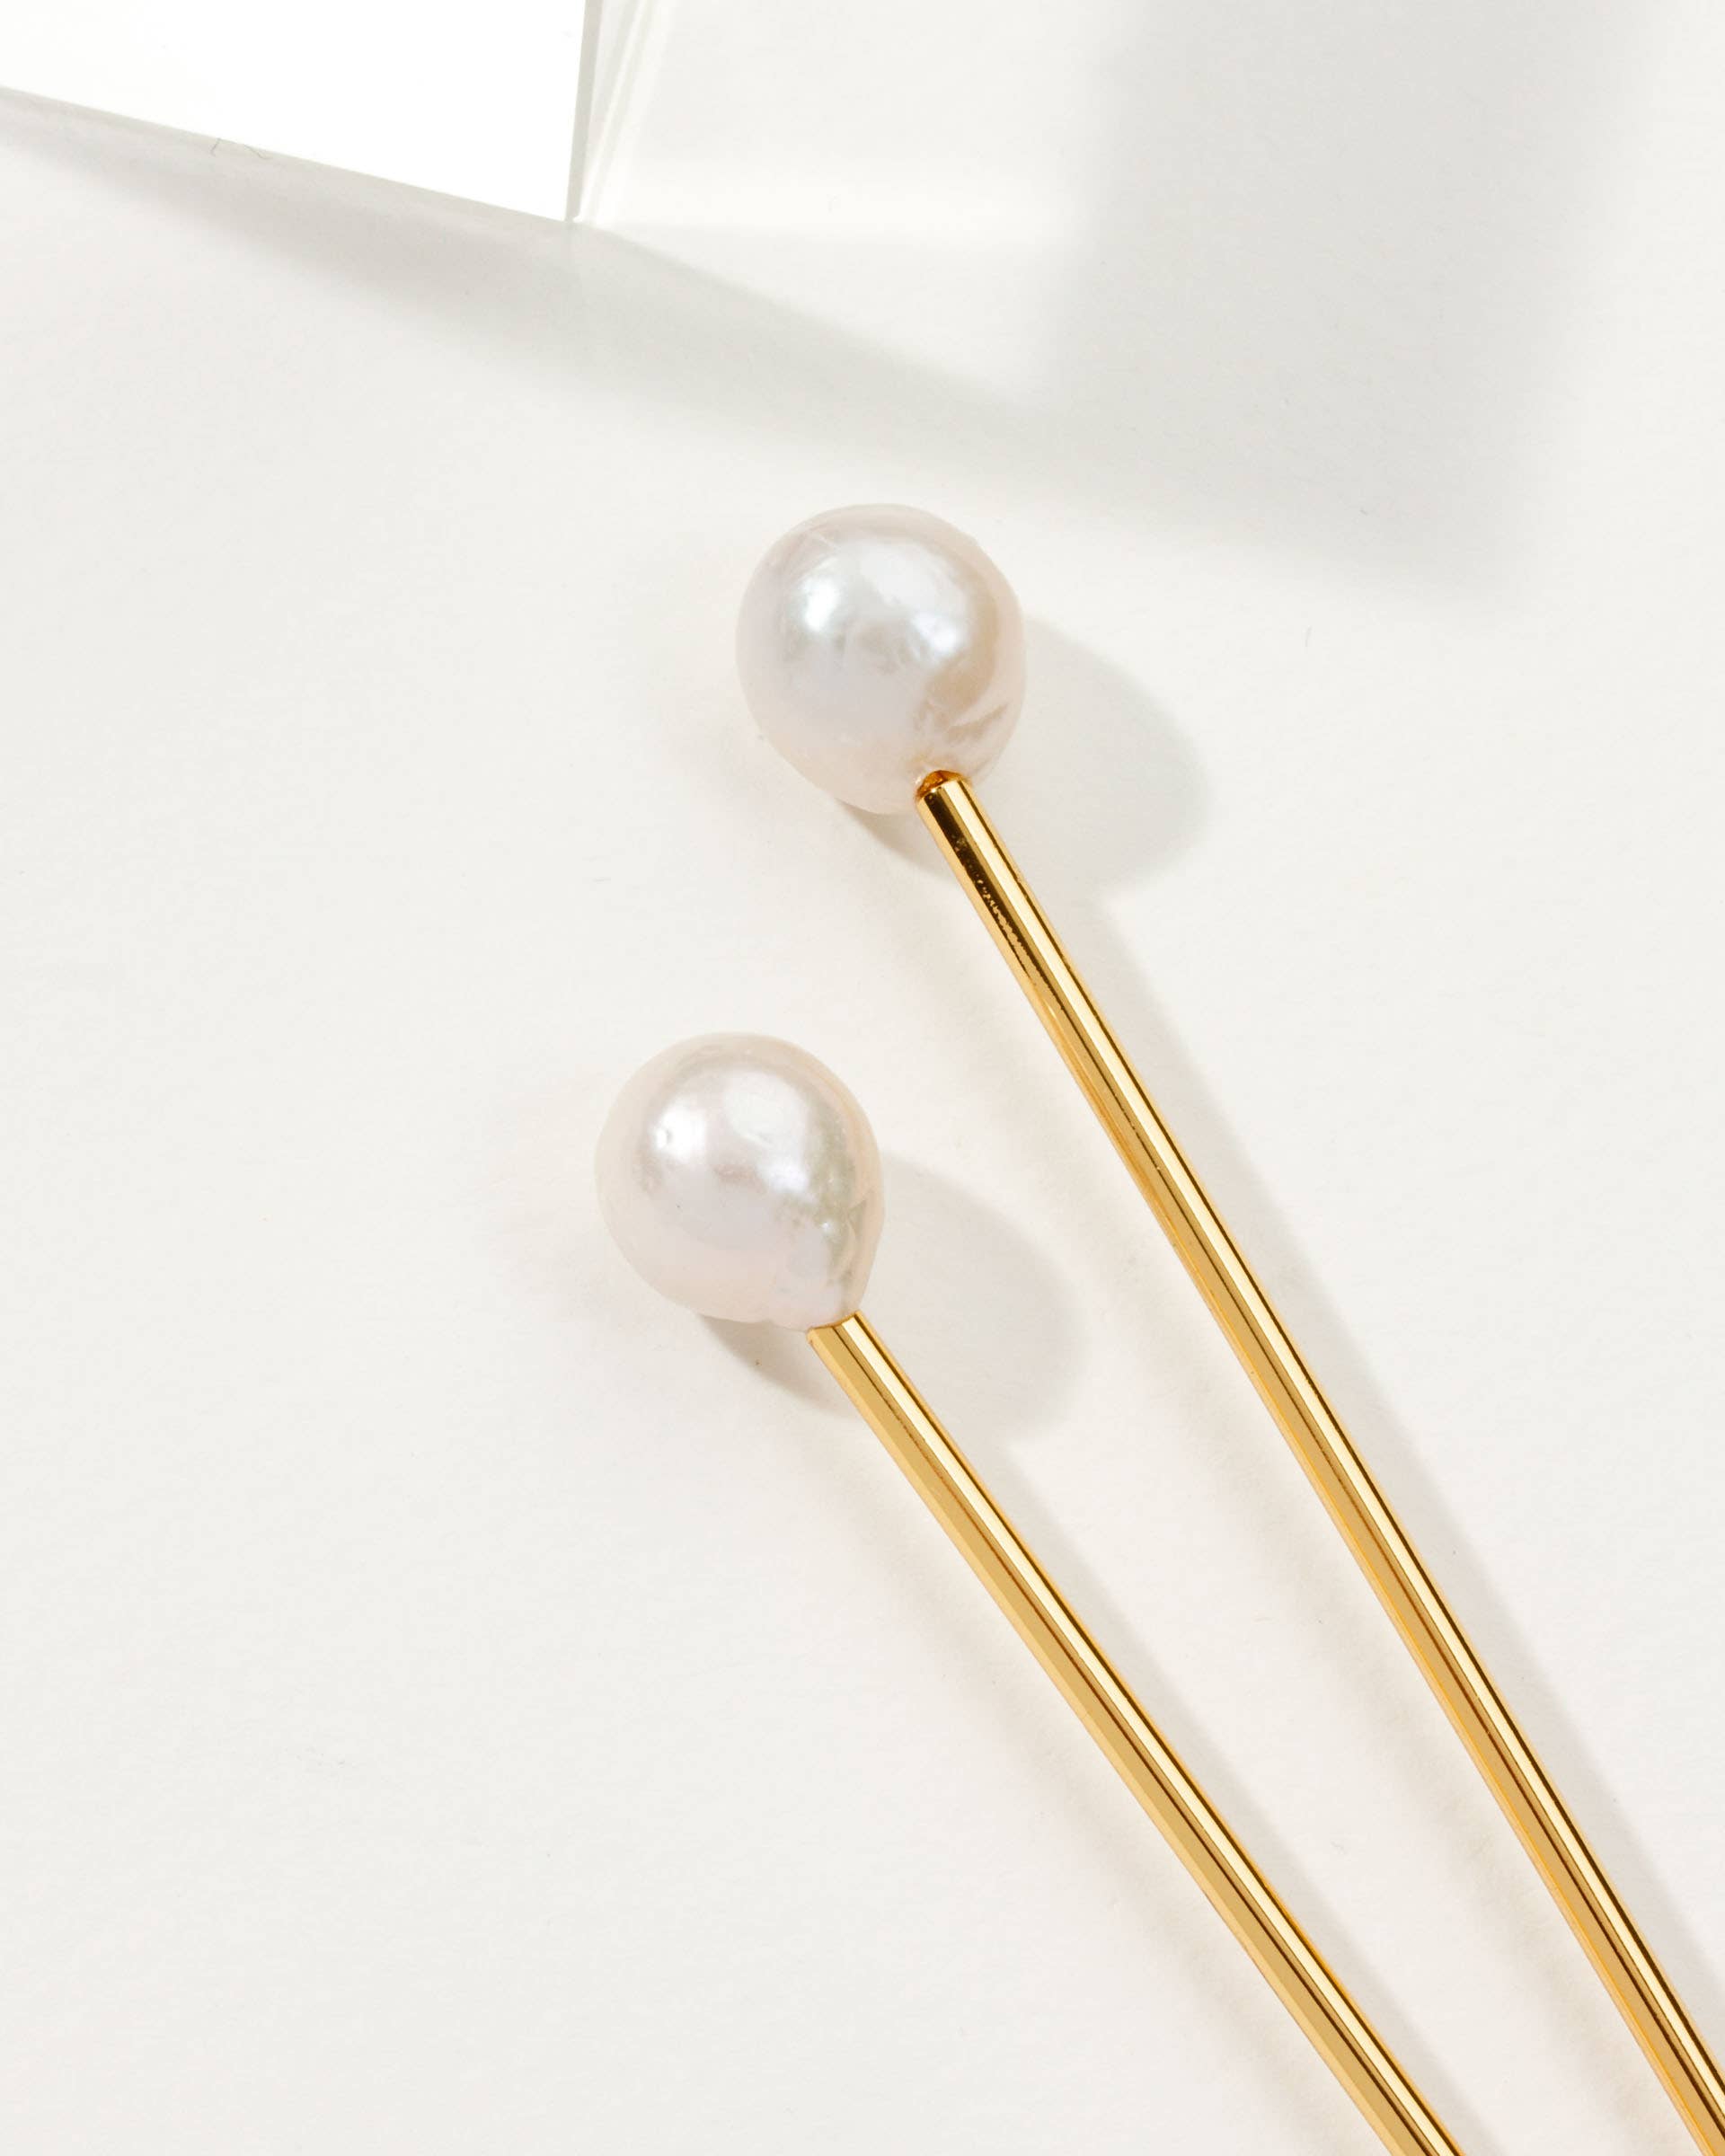 Ebb and Flow Pearl Hair Pin Jewelry